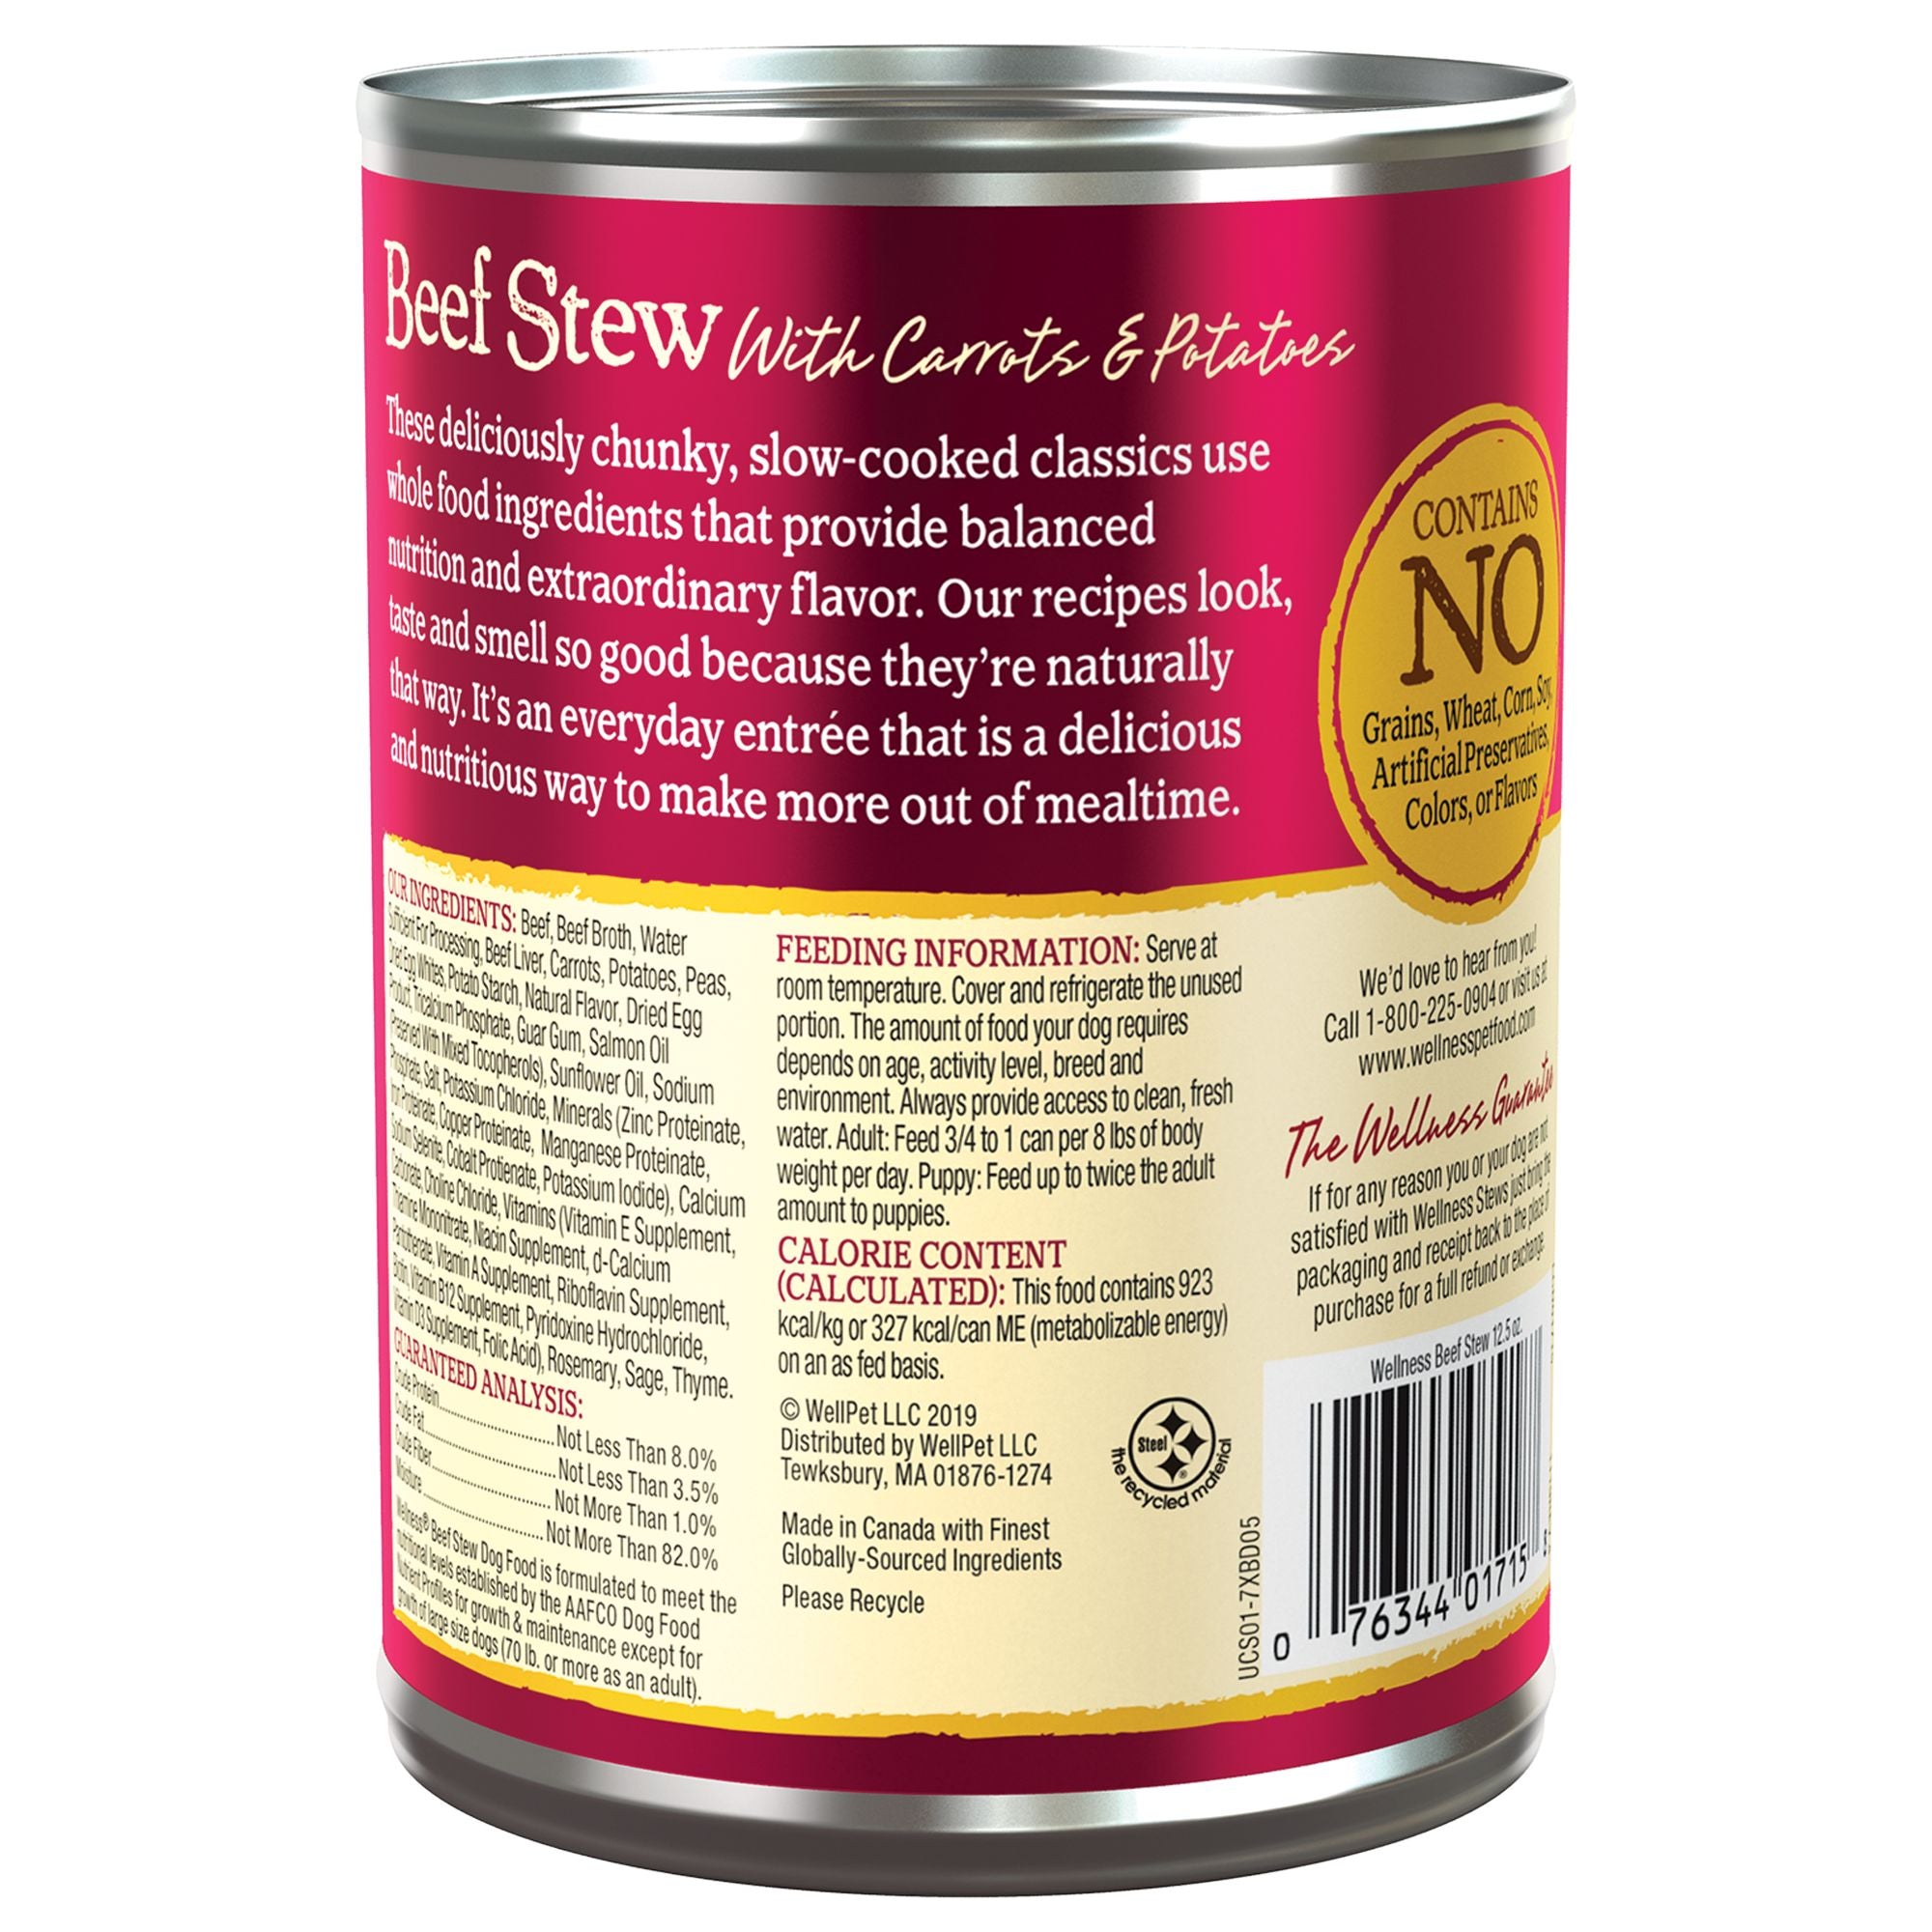 Wellness Beef Stew with Carrots and Potatoes Recipe Canned Wet Dog Food - 12.5 OZ - Natural, Grain Free